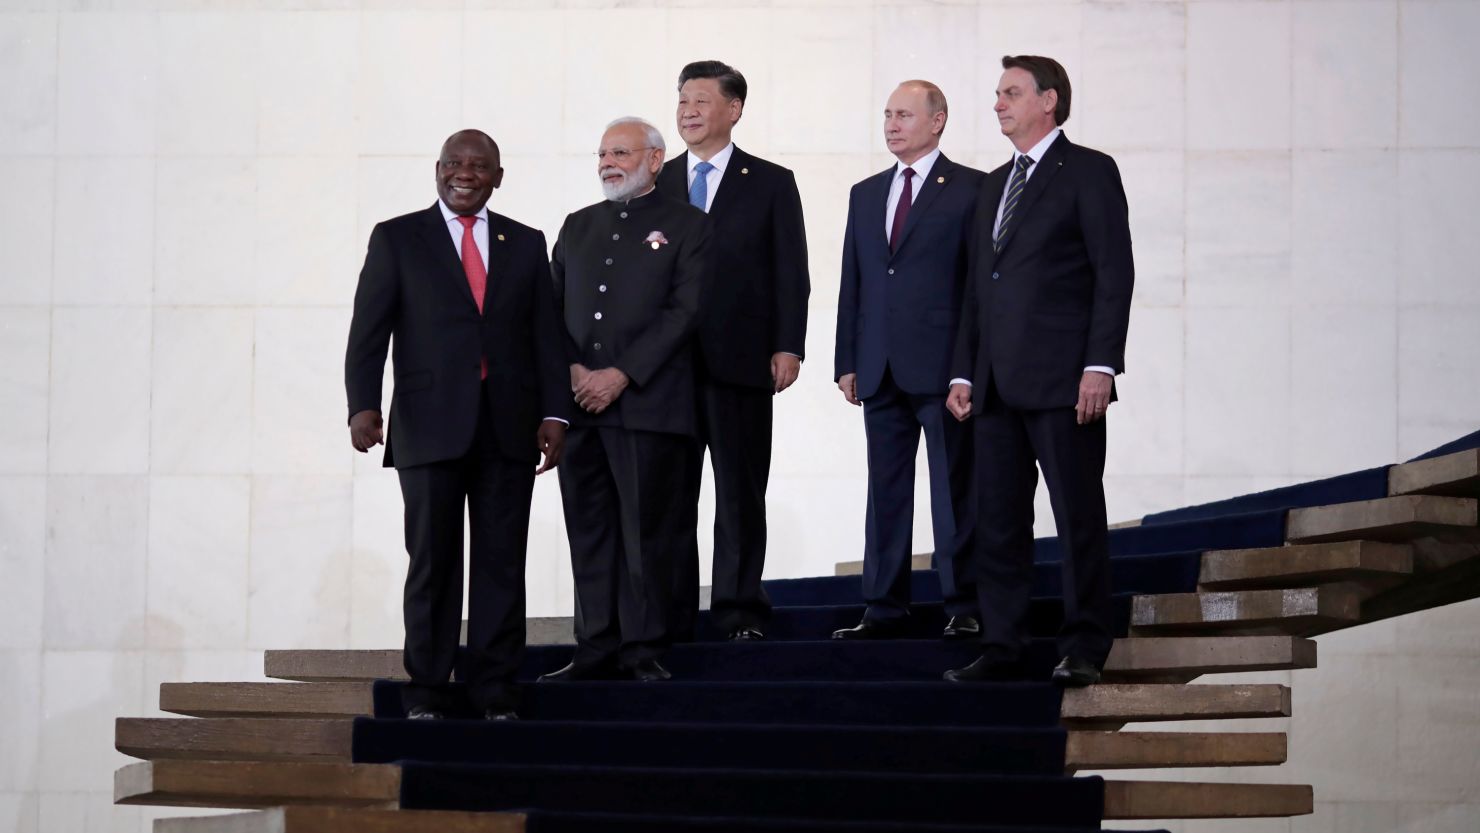 Leaders of BRICS nations meet during the group's summit in Brazil in 2019.